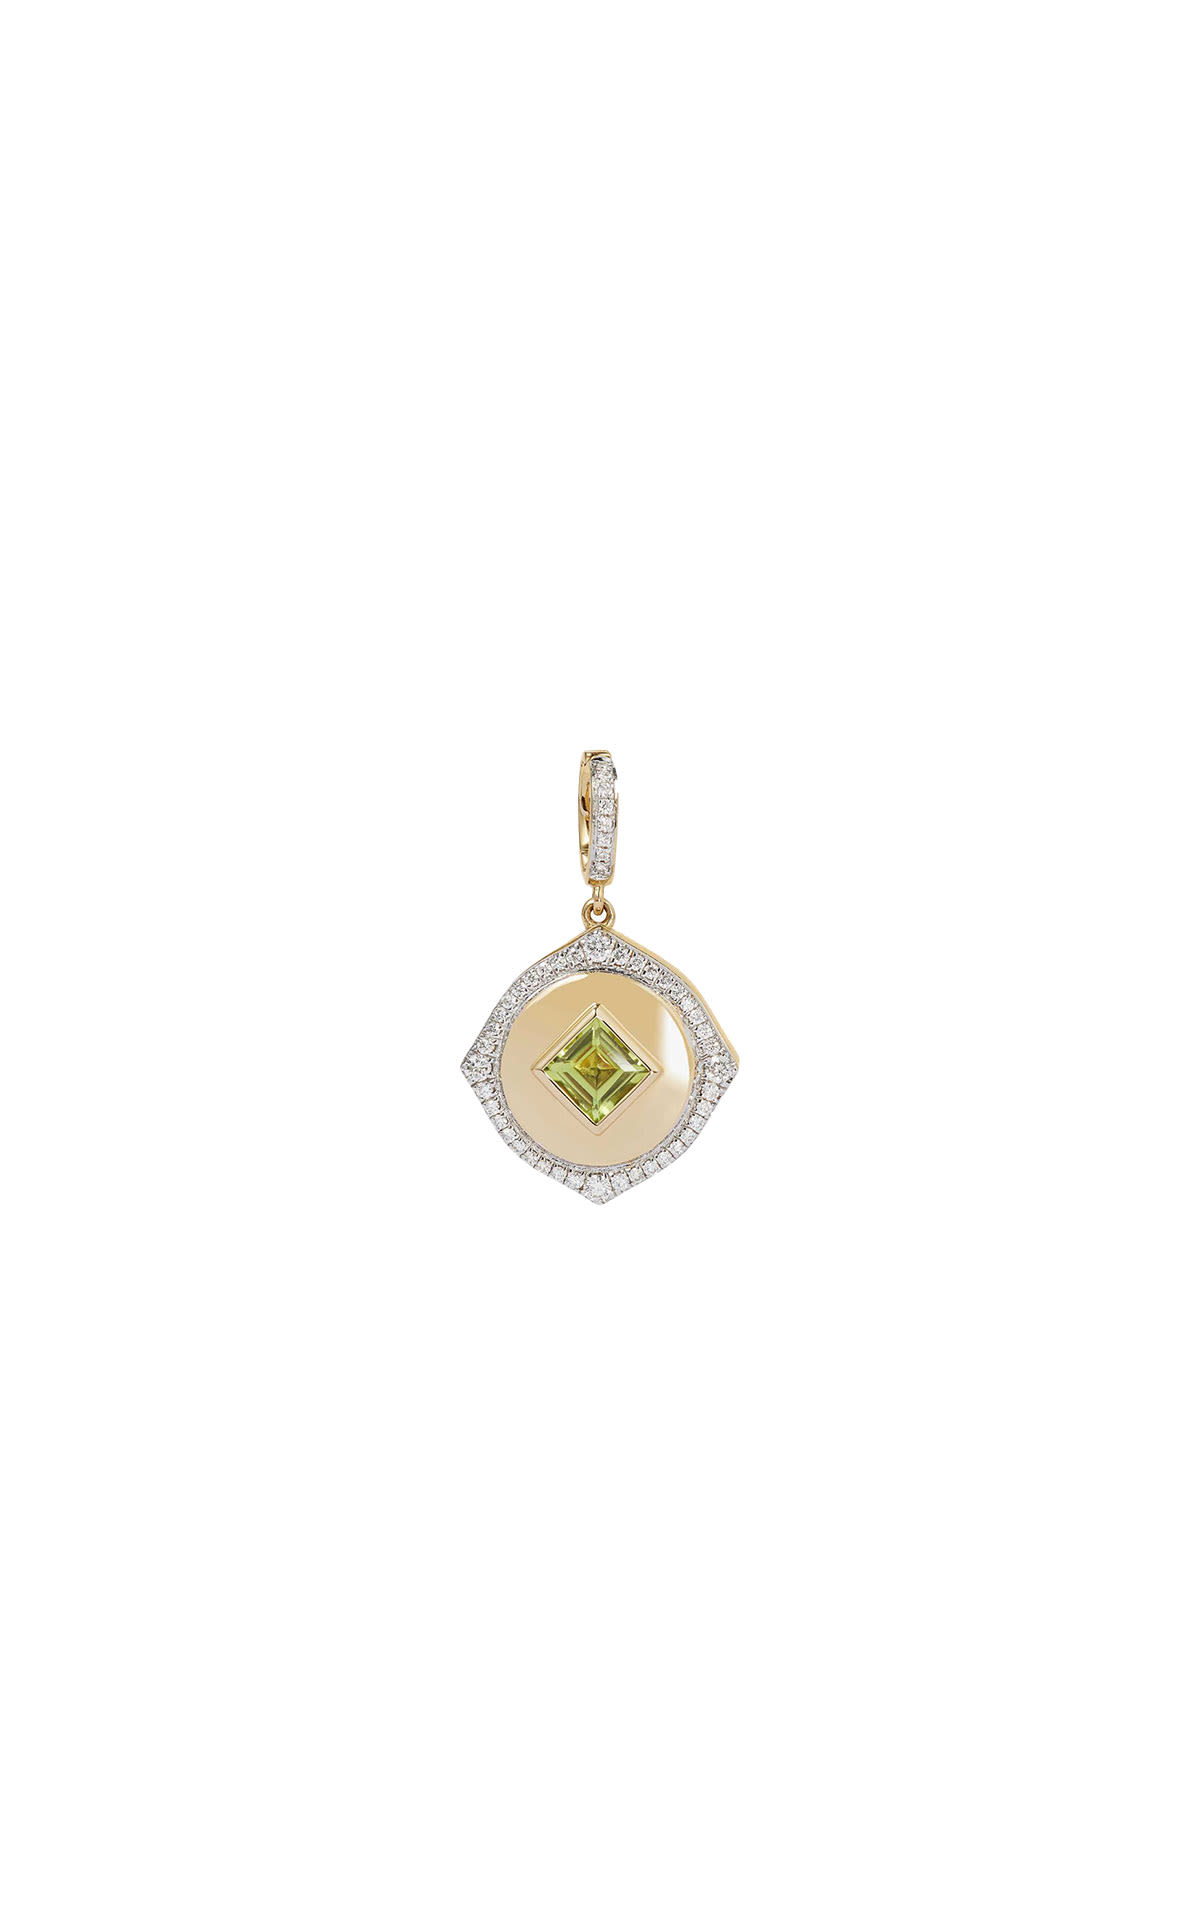 Annoushka August peridot from Bicester Village